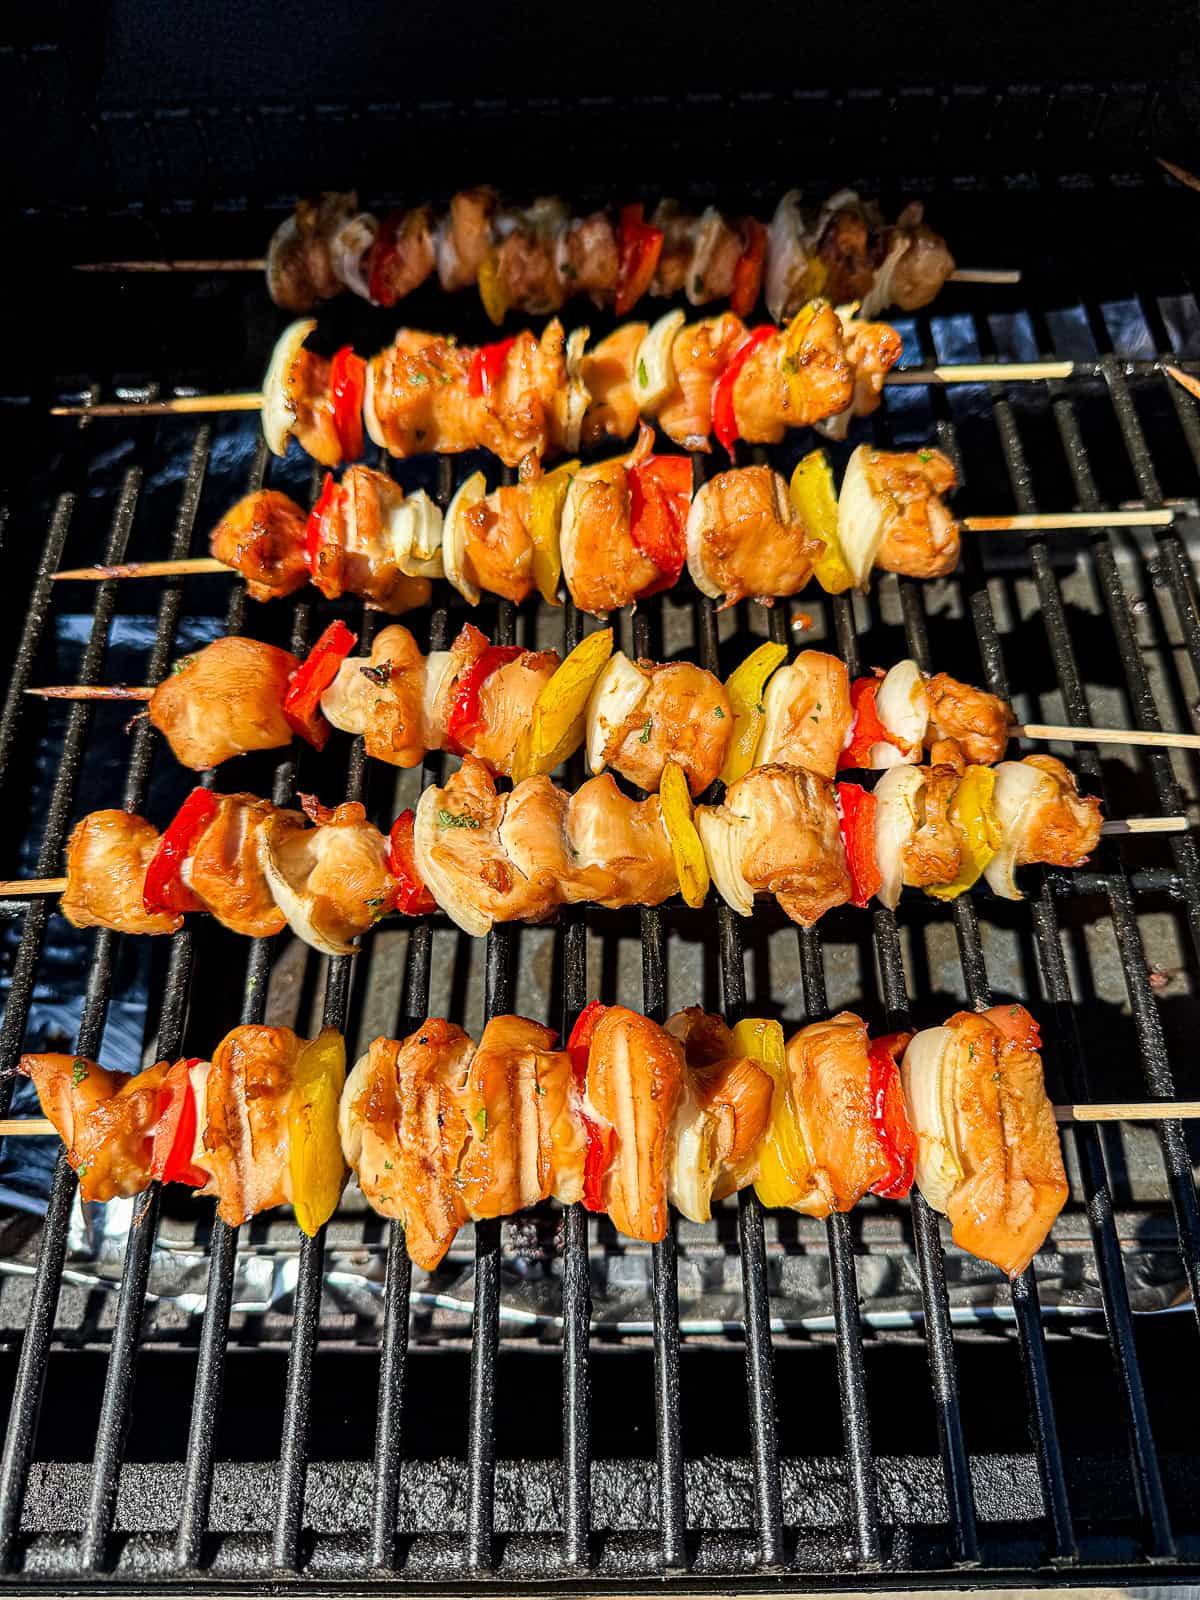 BBQ Smoking Marinated Chicken Breast on Skewers in the Traeger Grill 